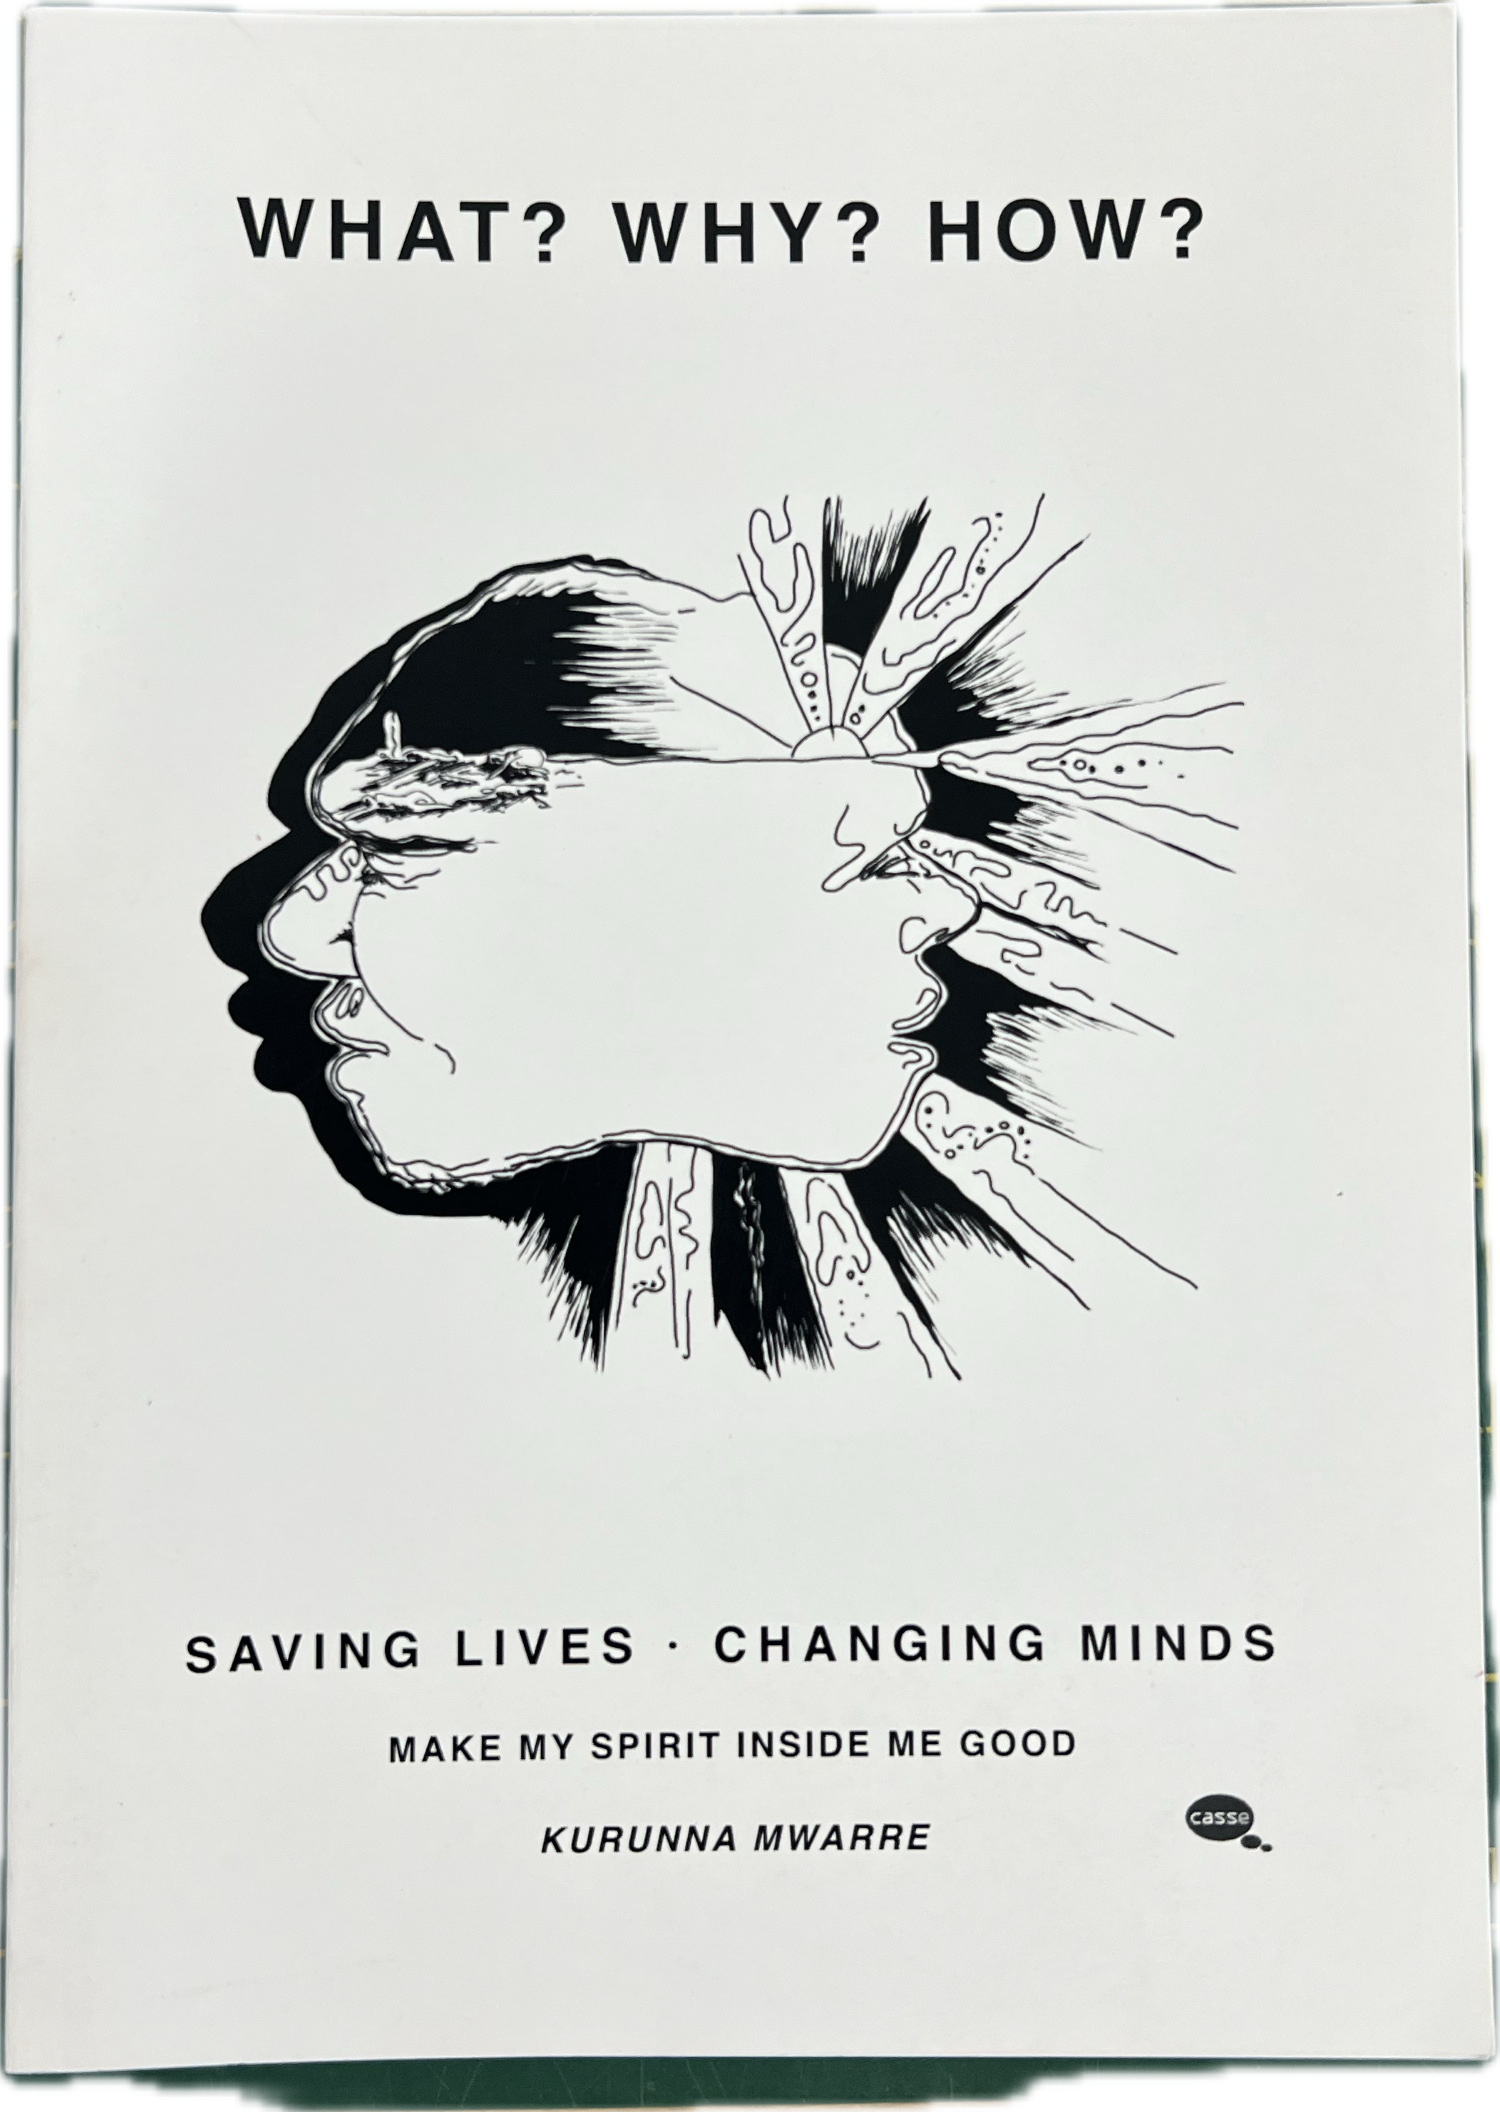 What? Why? How? Saving lives, changing minds by Pamela Nathan